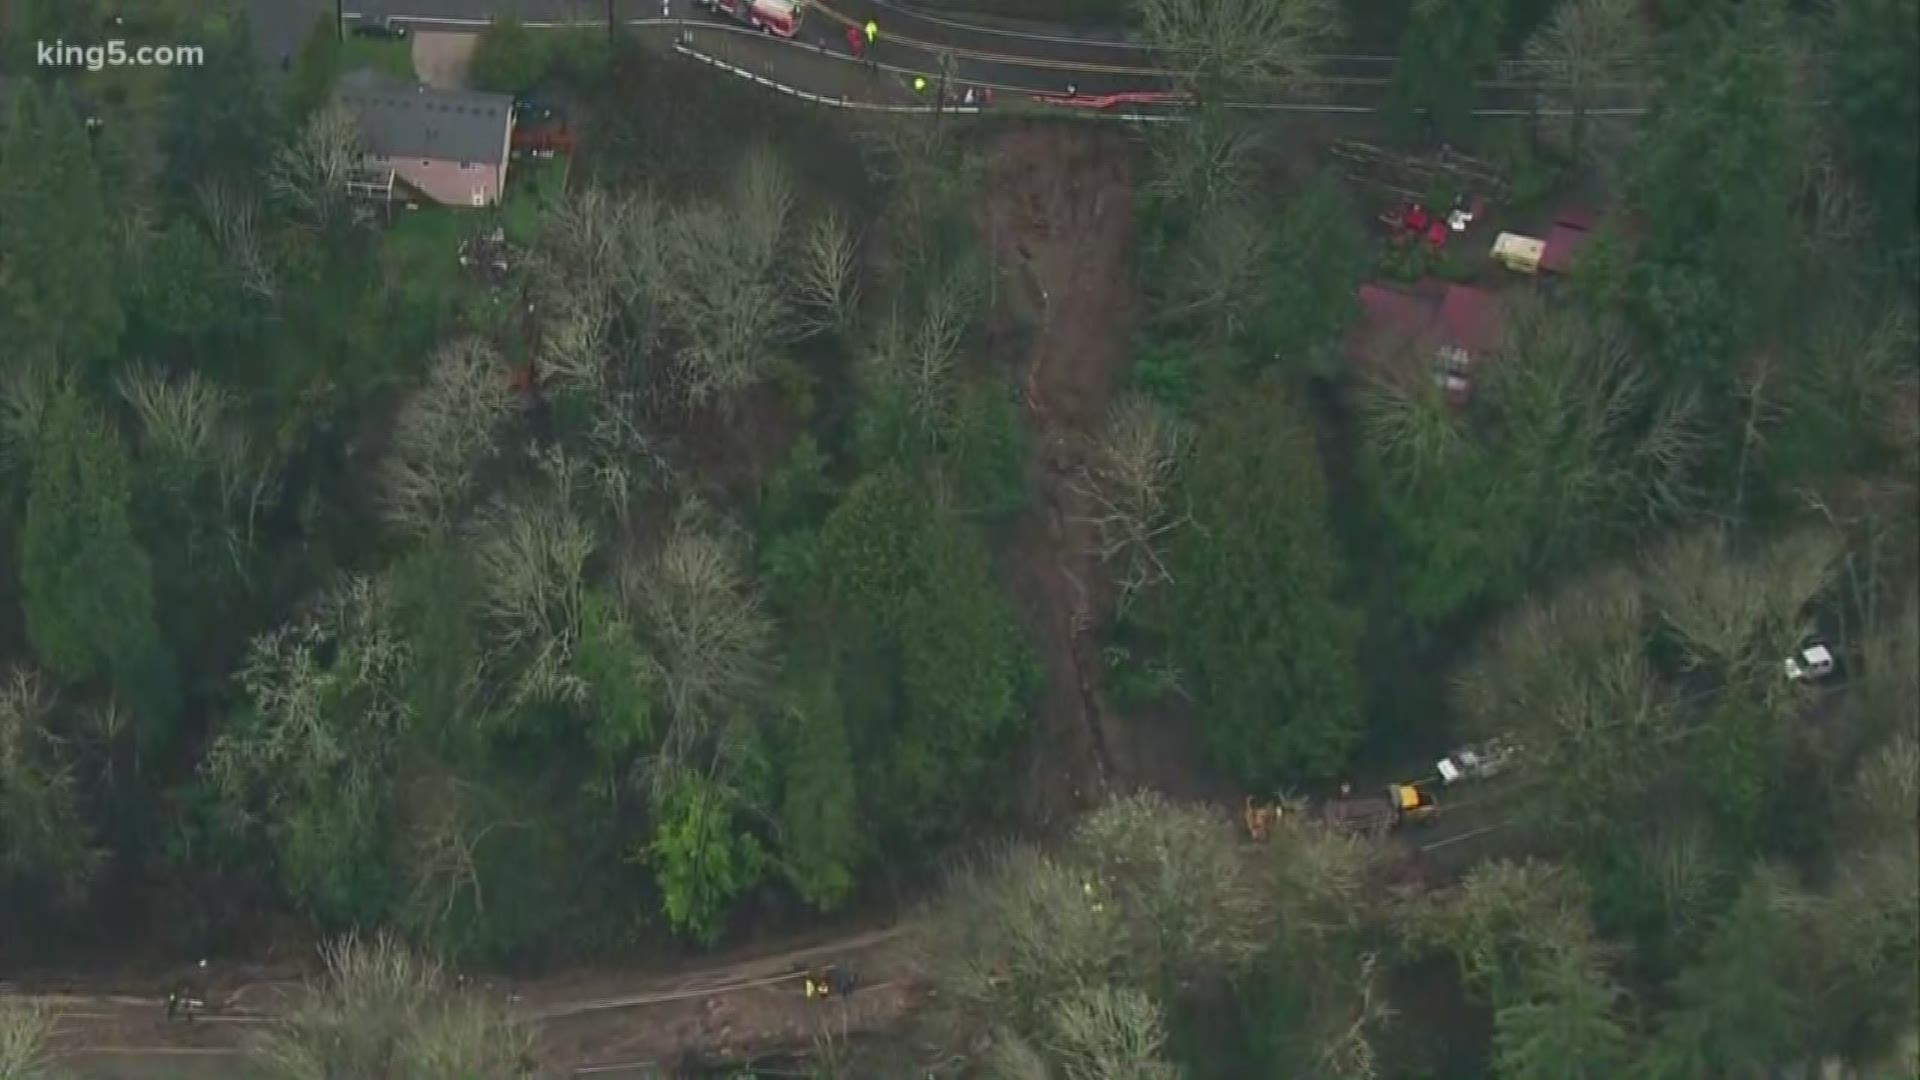 Several areas were hit with flooding. One person was trapped in a landslide and other cars have gotten stuck in deep road water.  KING 5 team coverage.